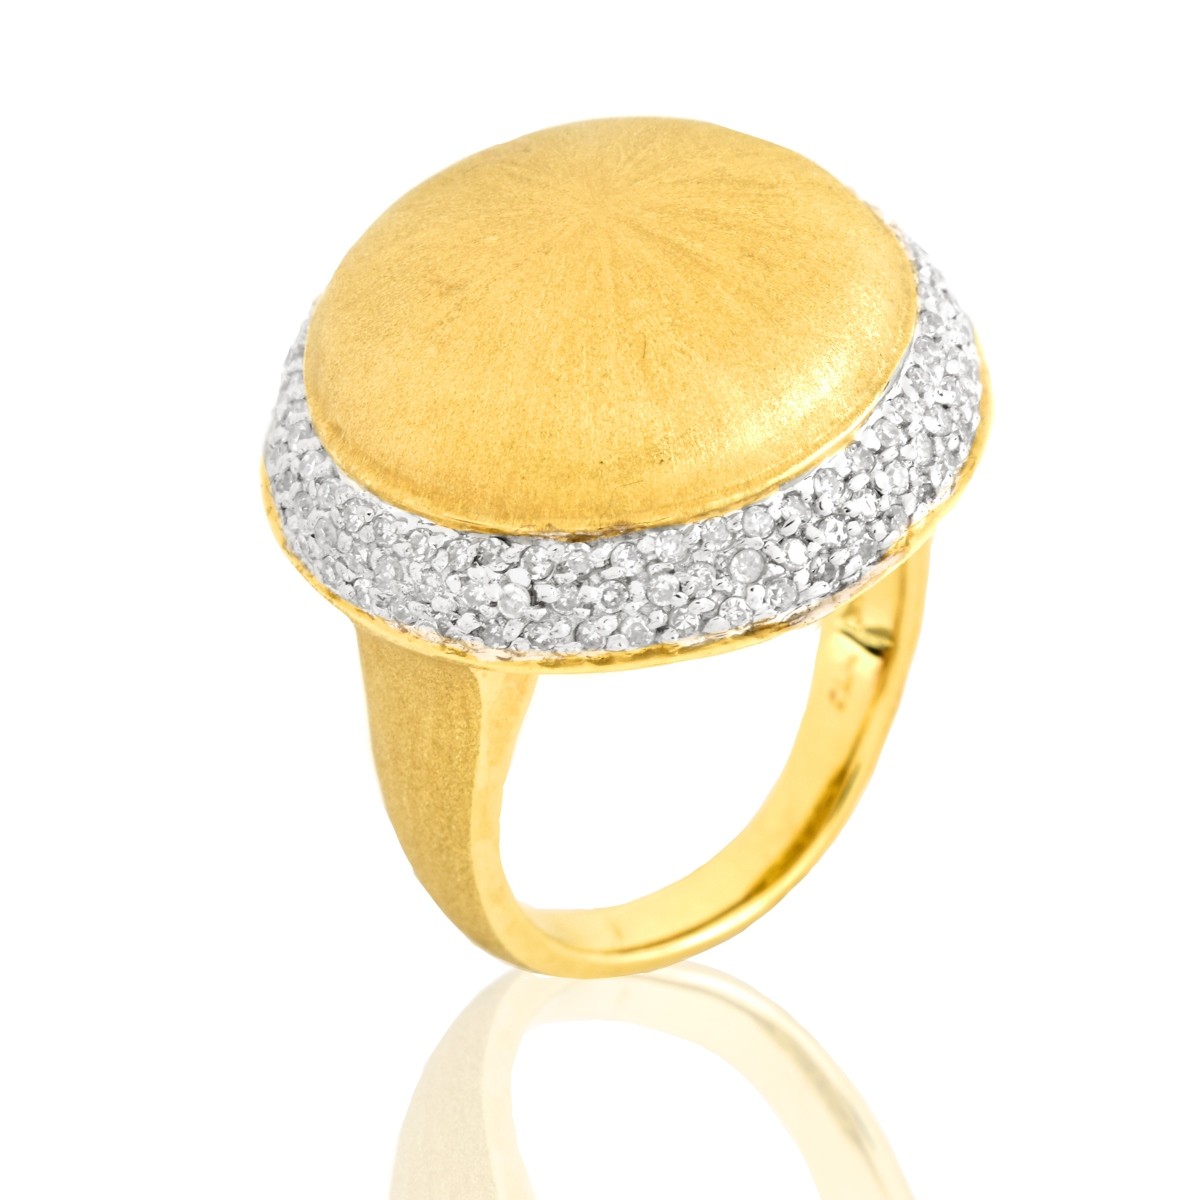 Diamond and 14K Gold Ring